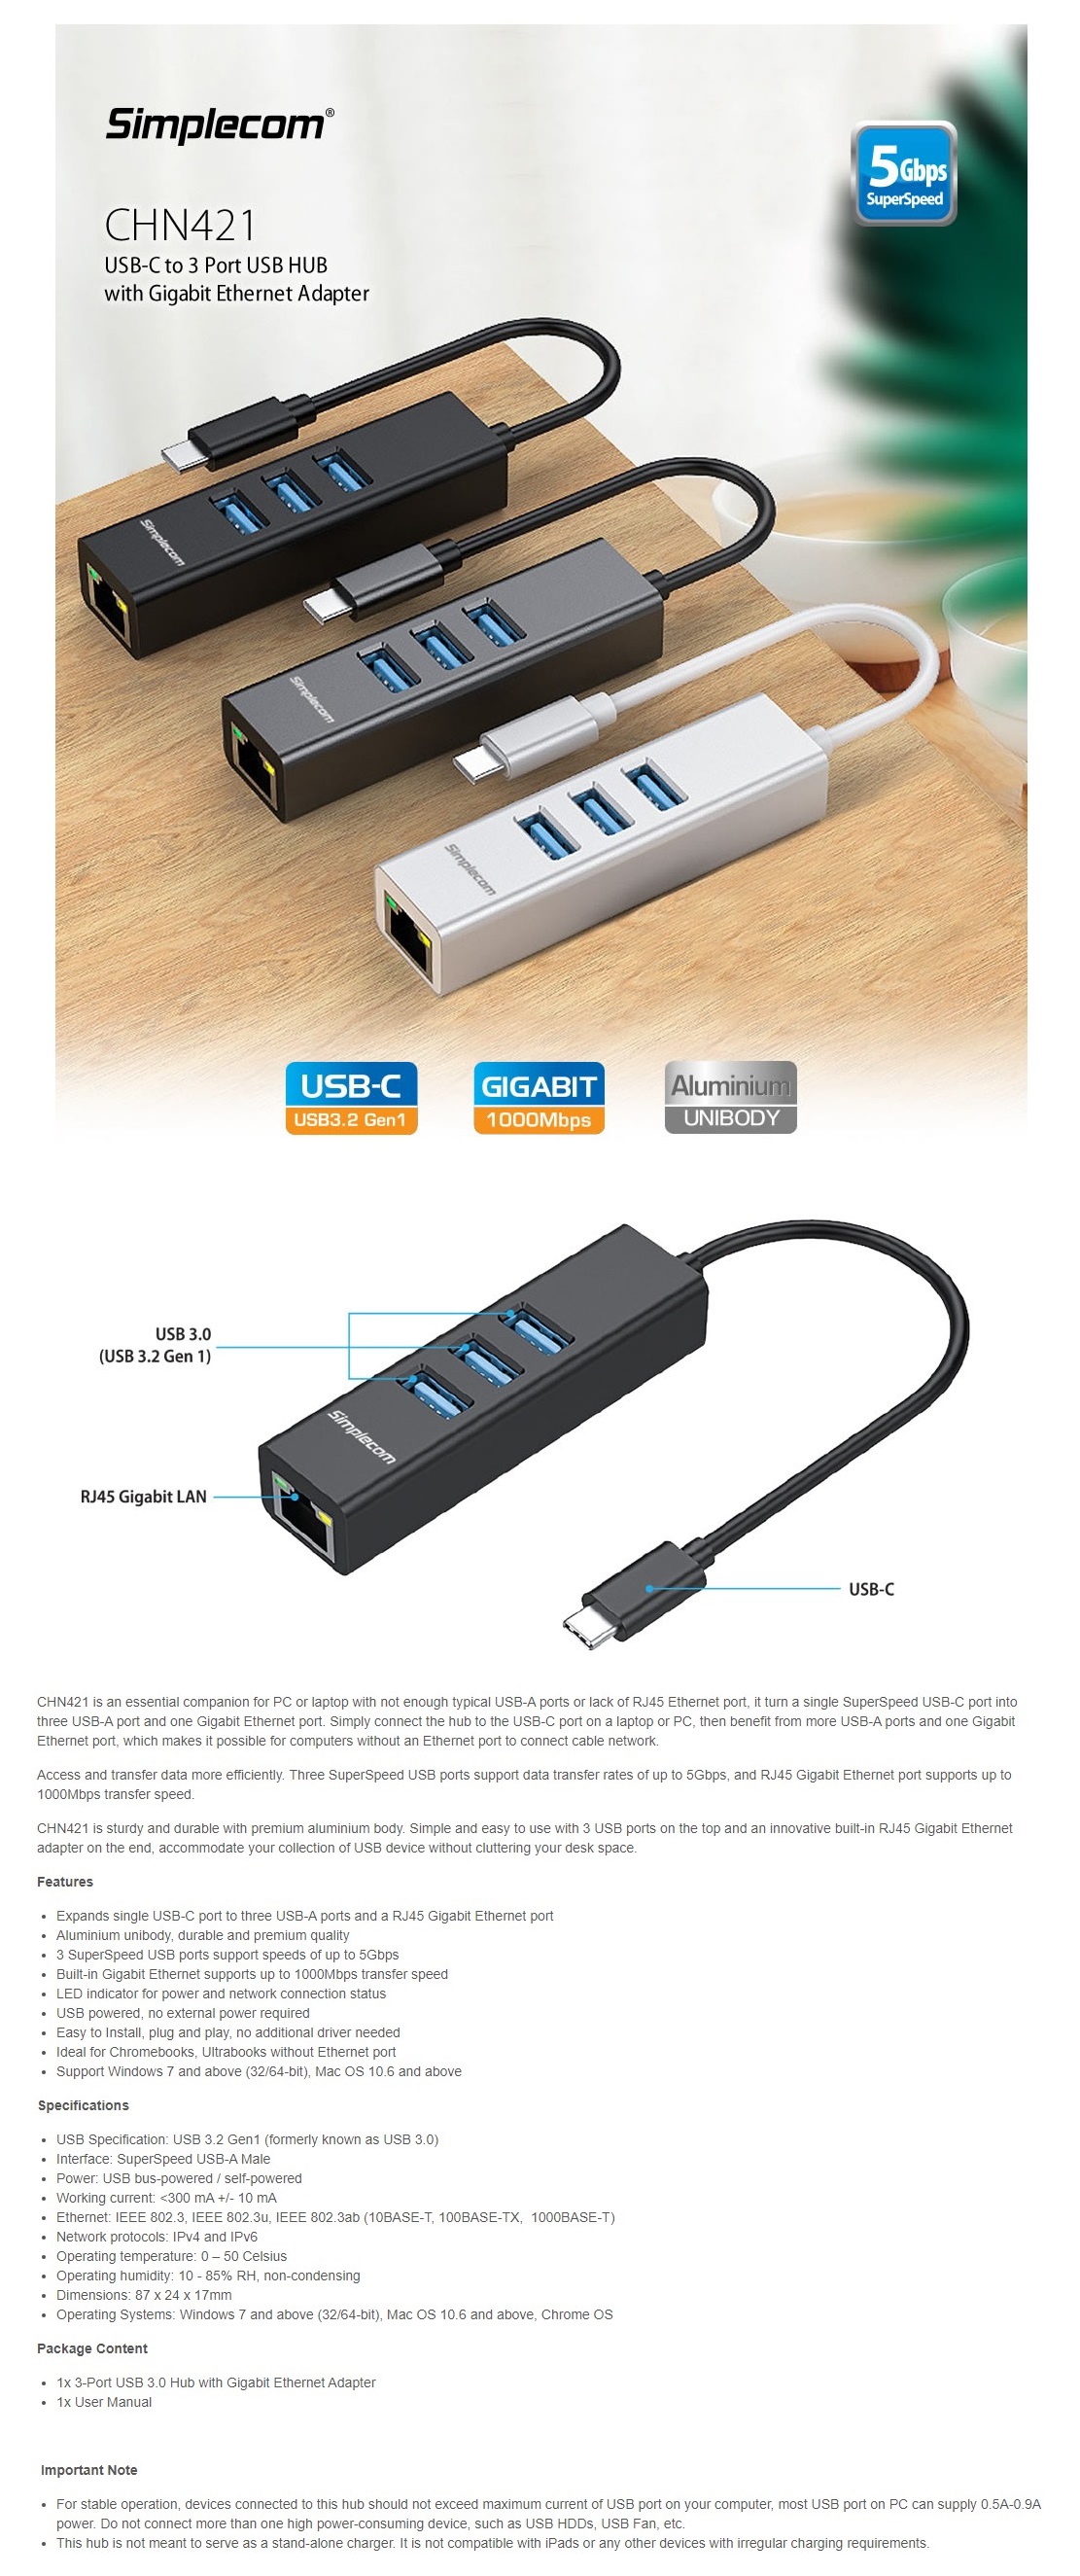 A large marketing image providing additional information about the product Simplecom CHN421 USB-C to 3 Port USB-A HUB w/ Gigabit Ethernet Adapter - Black - Additional alt info not provided